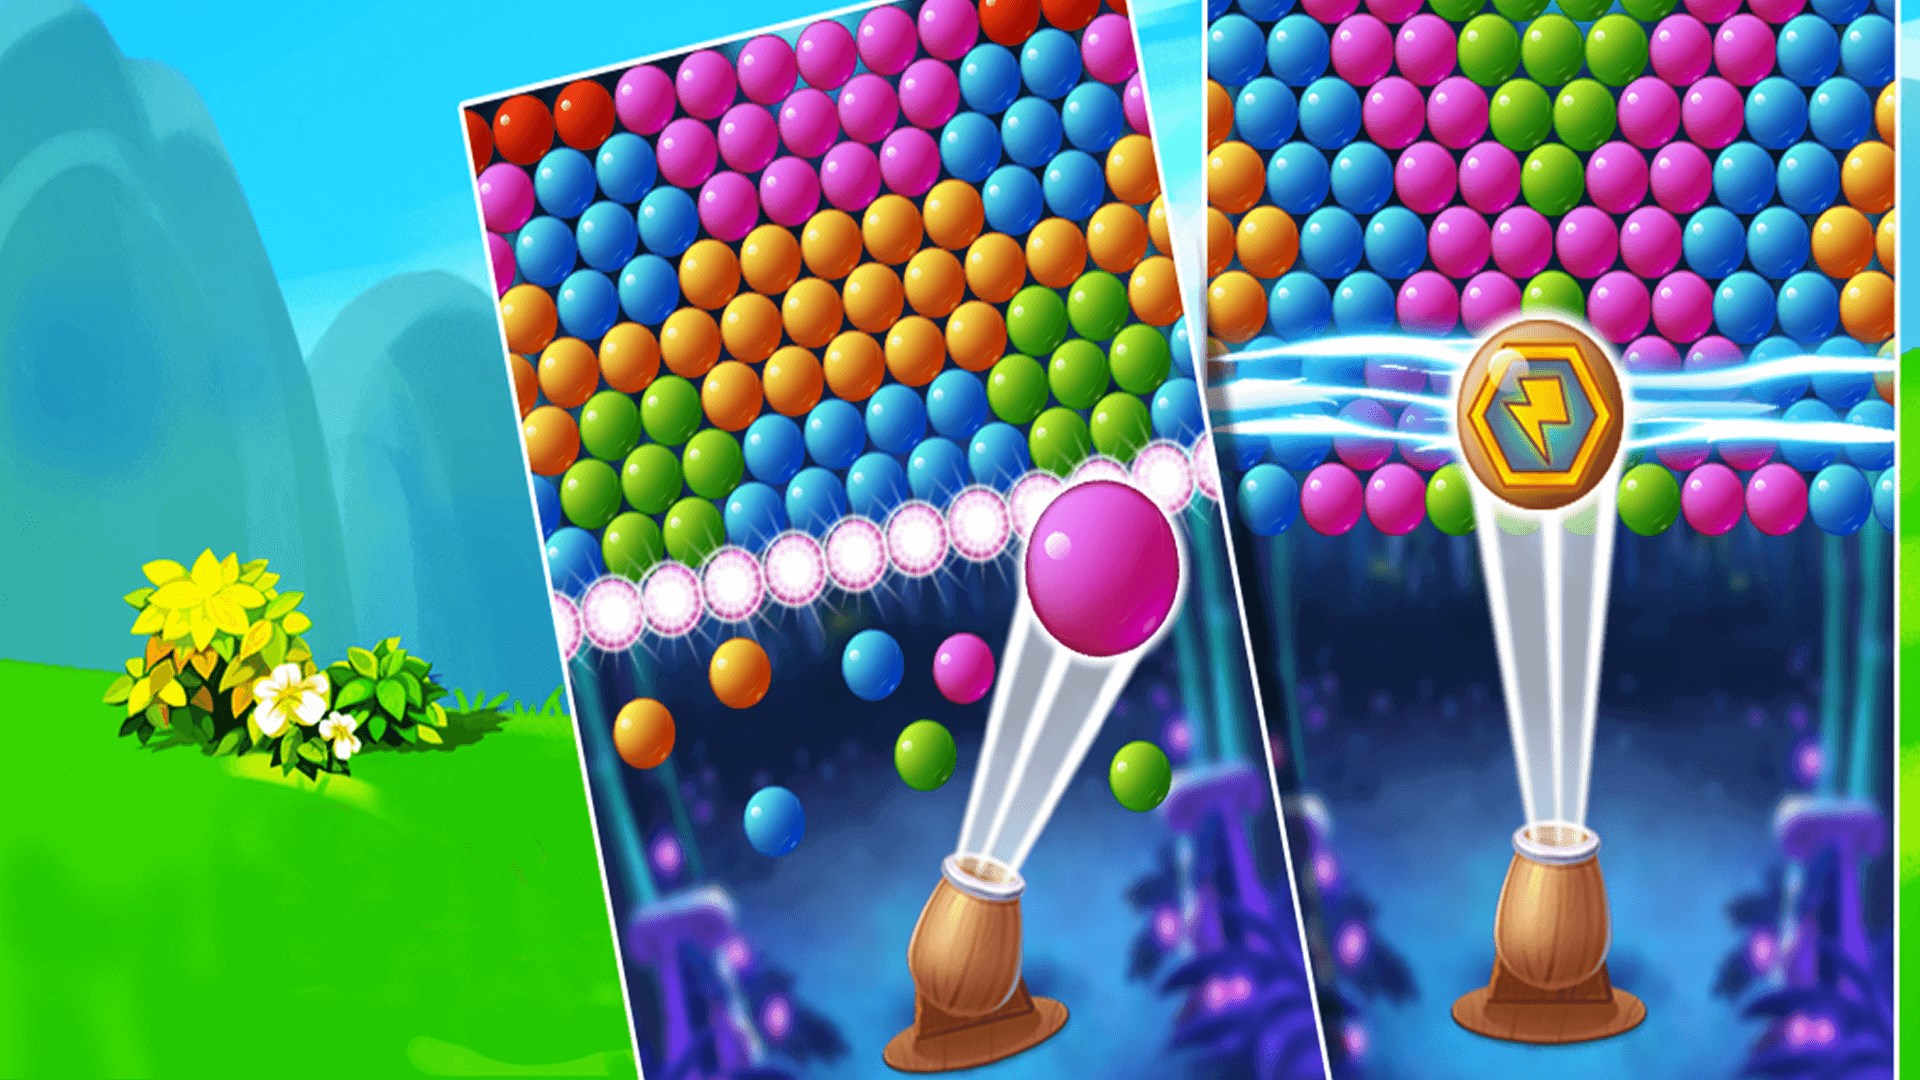 Get Bubble Shooter. - Microsoft Store